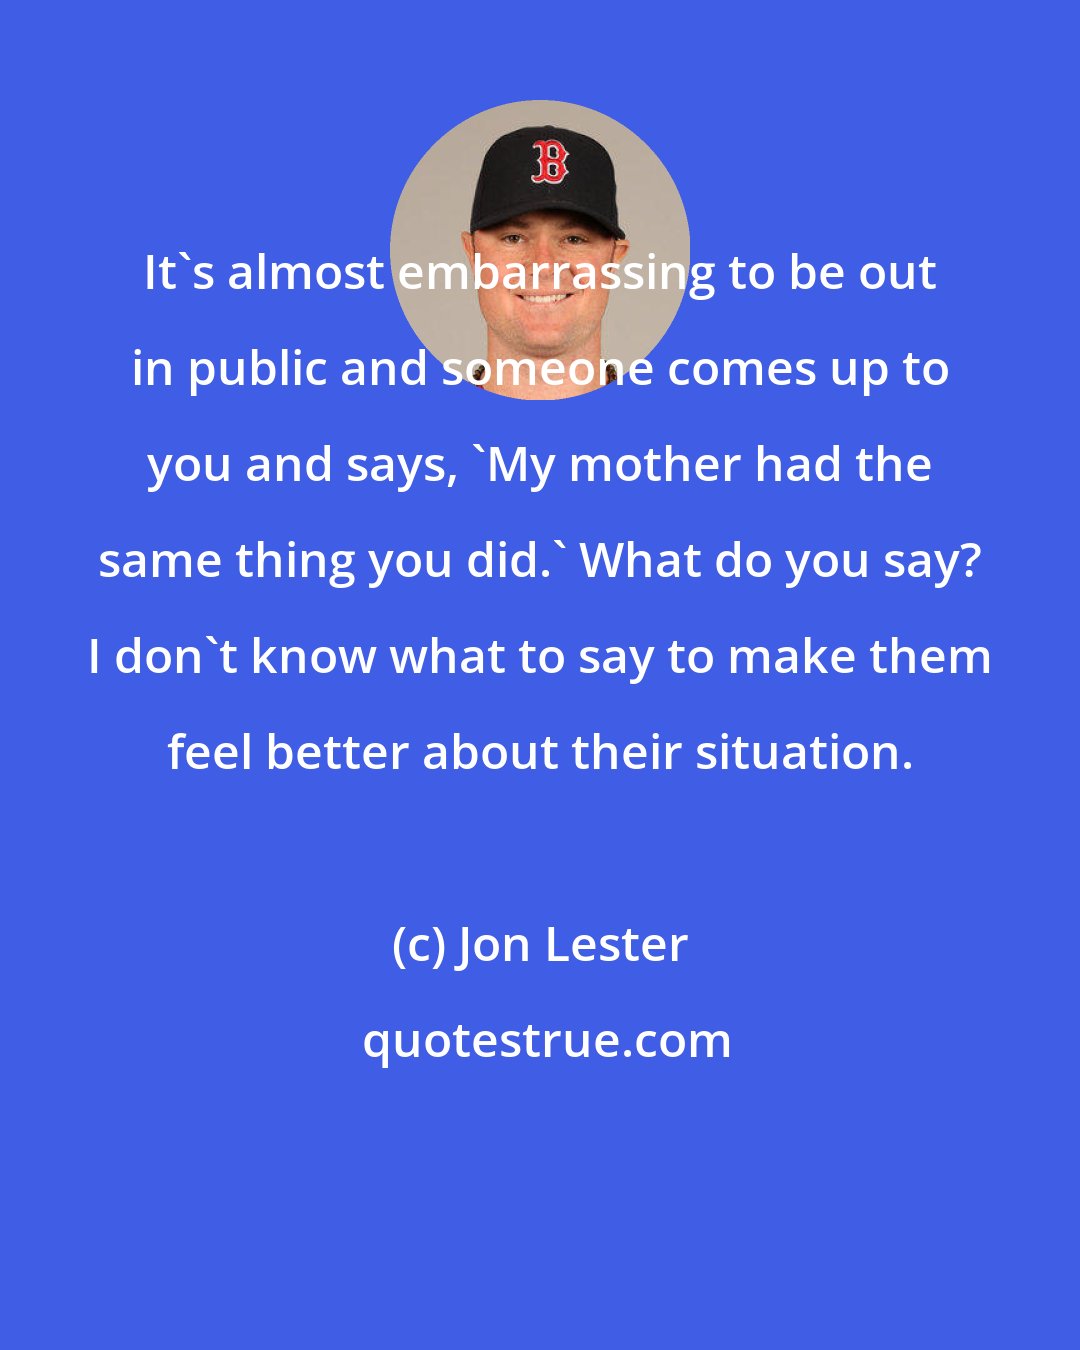 Jon Lester: It's almost embarrassing to be out in public and someone comes up to you and says, 'My mother had the same thing you did.' What do you say? I don't know what to say to make them feel better about their situation.